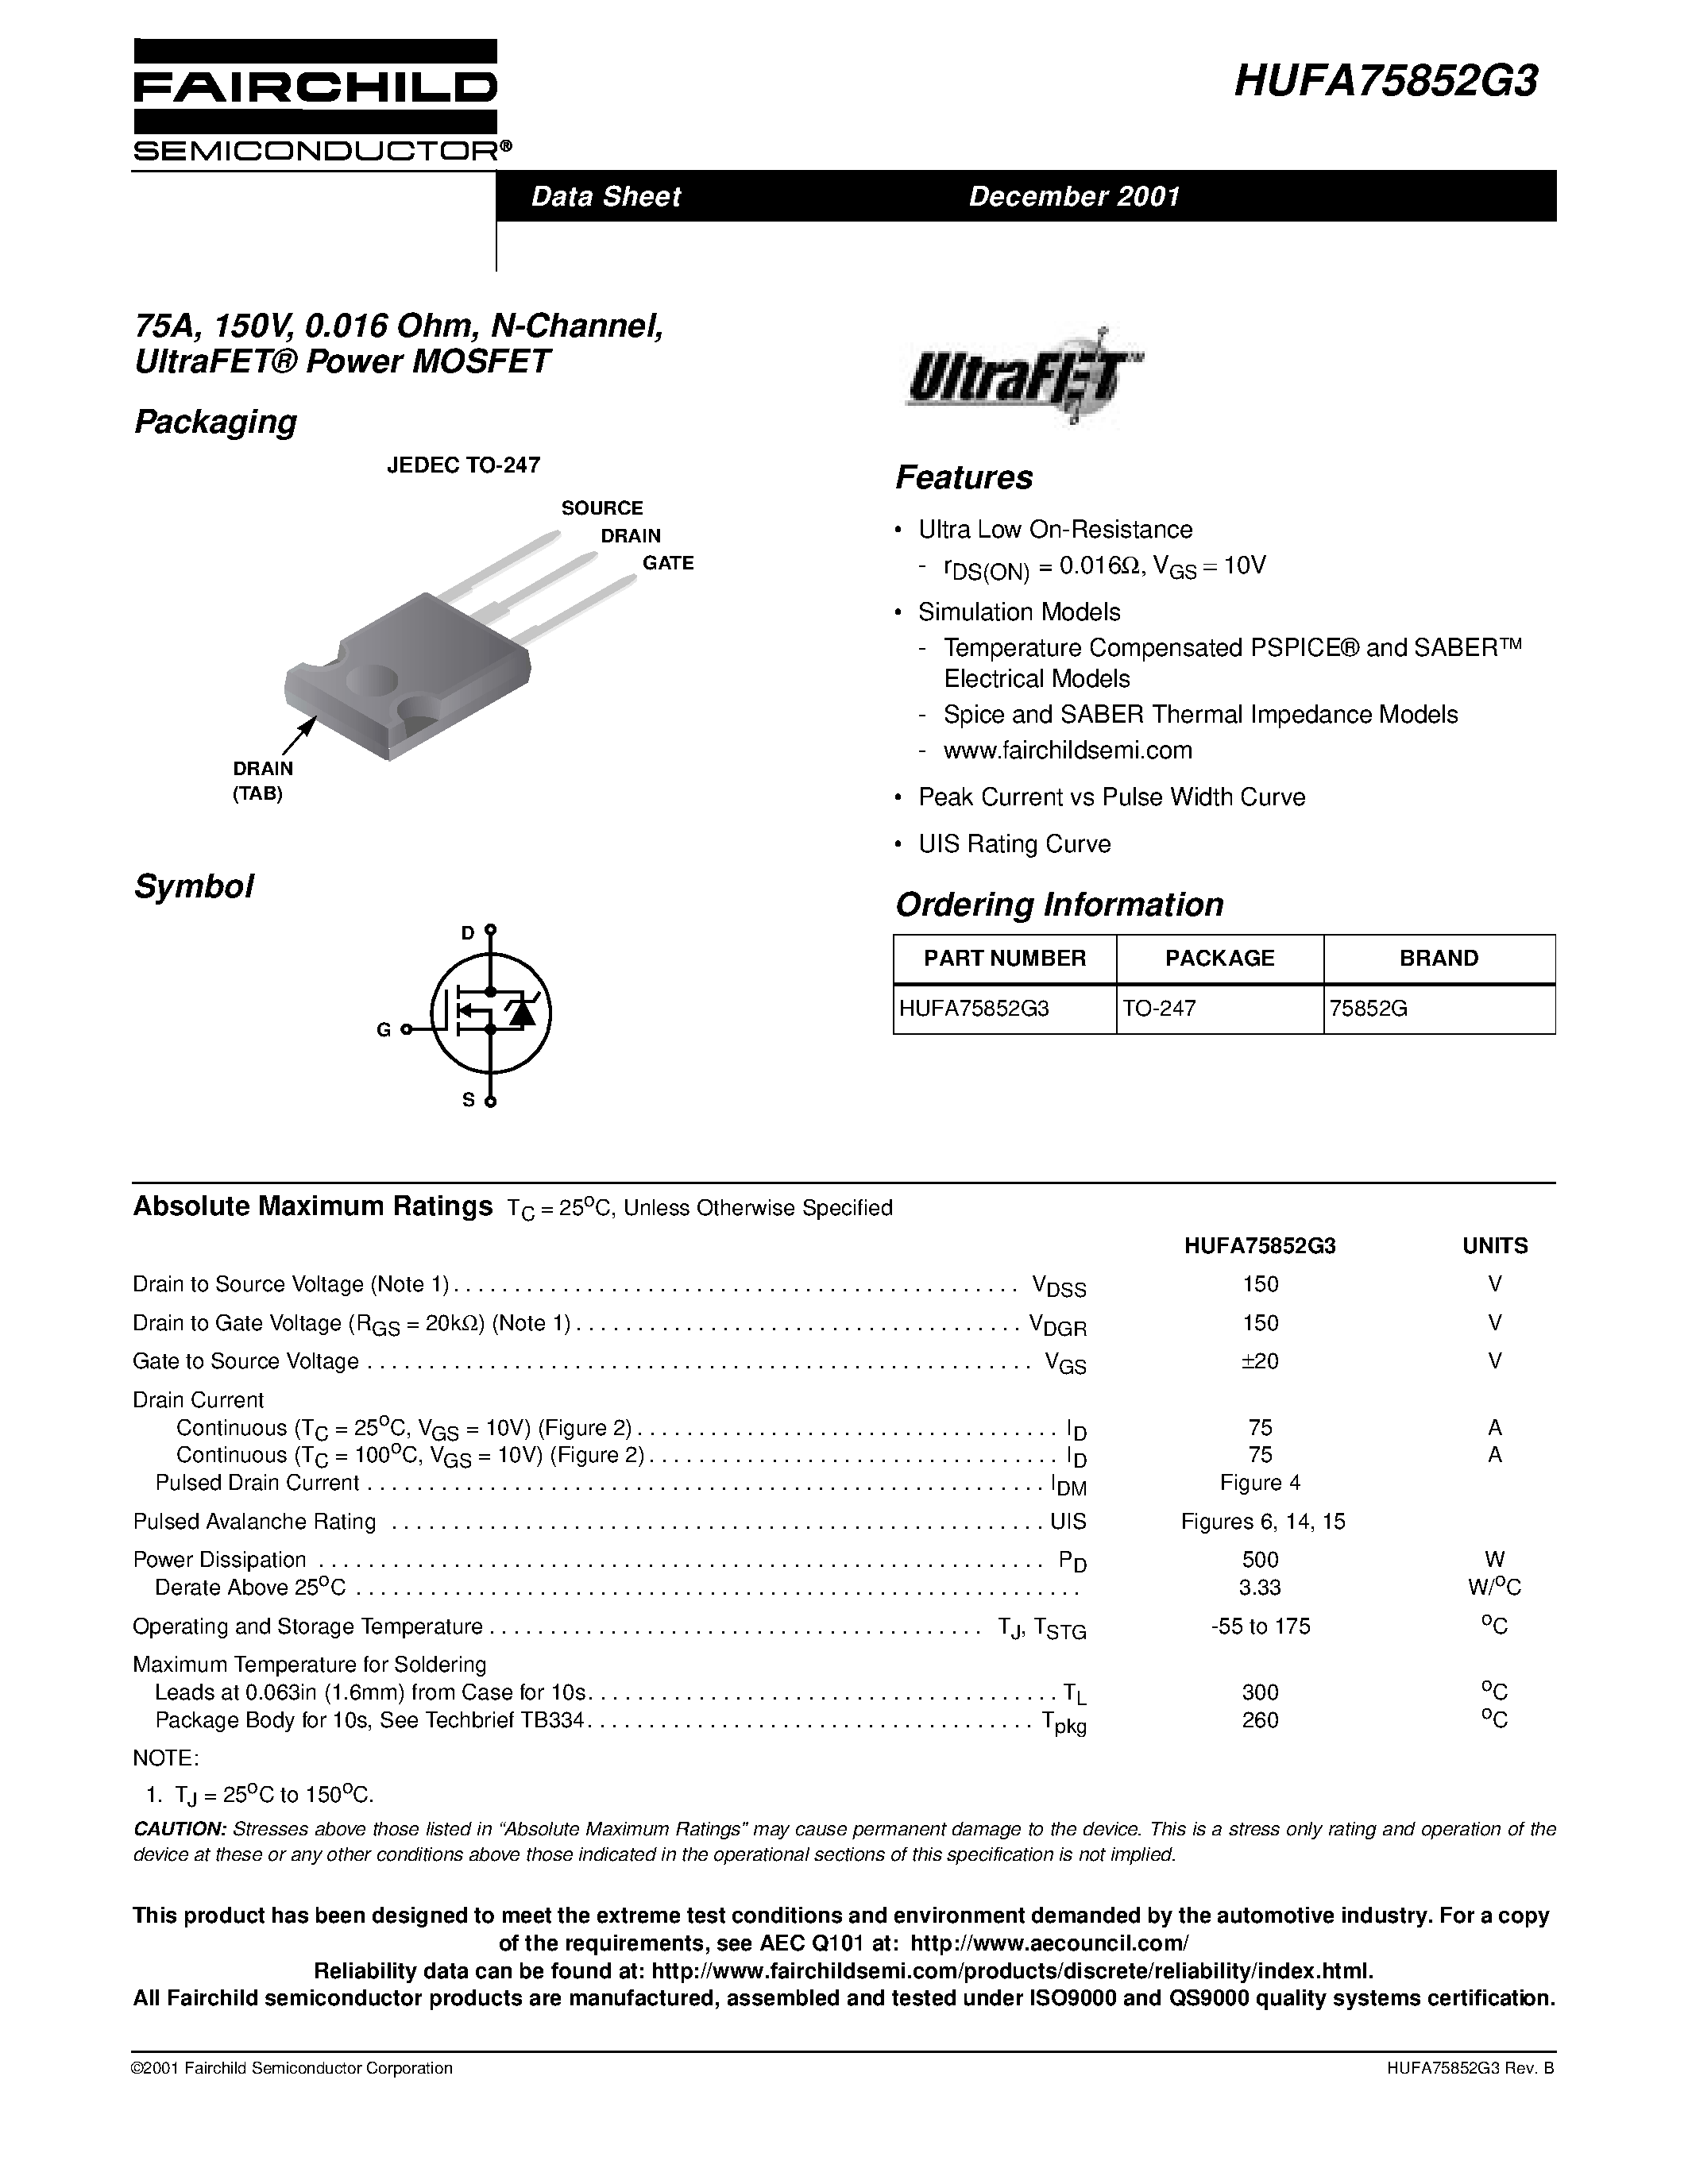 Datasheet HUFA75852G3 - 75A/ 150V/ 0.016 Ohm/ N-Channel/ UltraFET Power MOSFET page 1